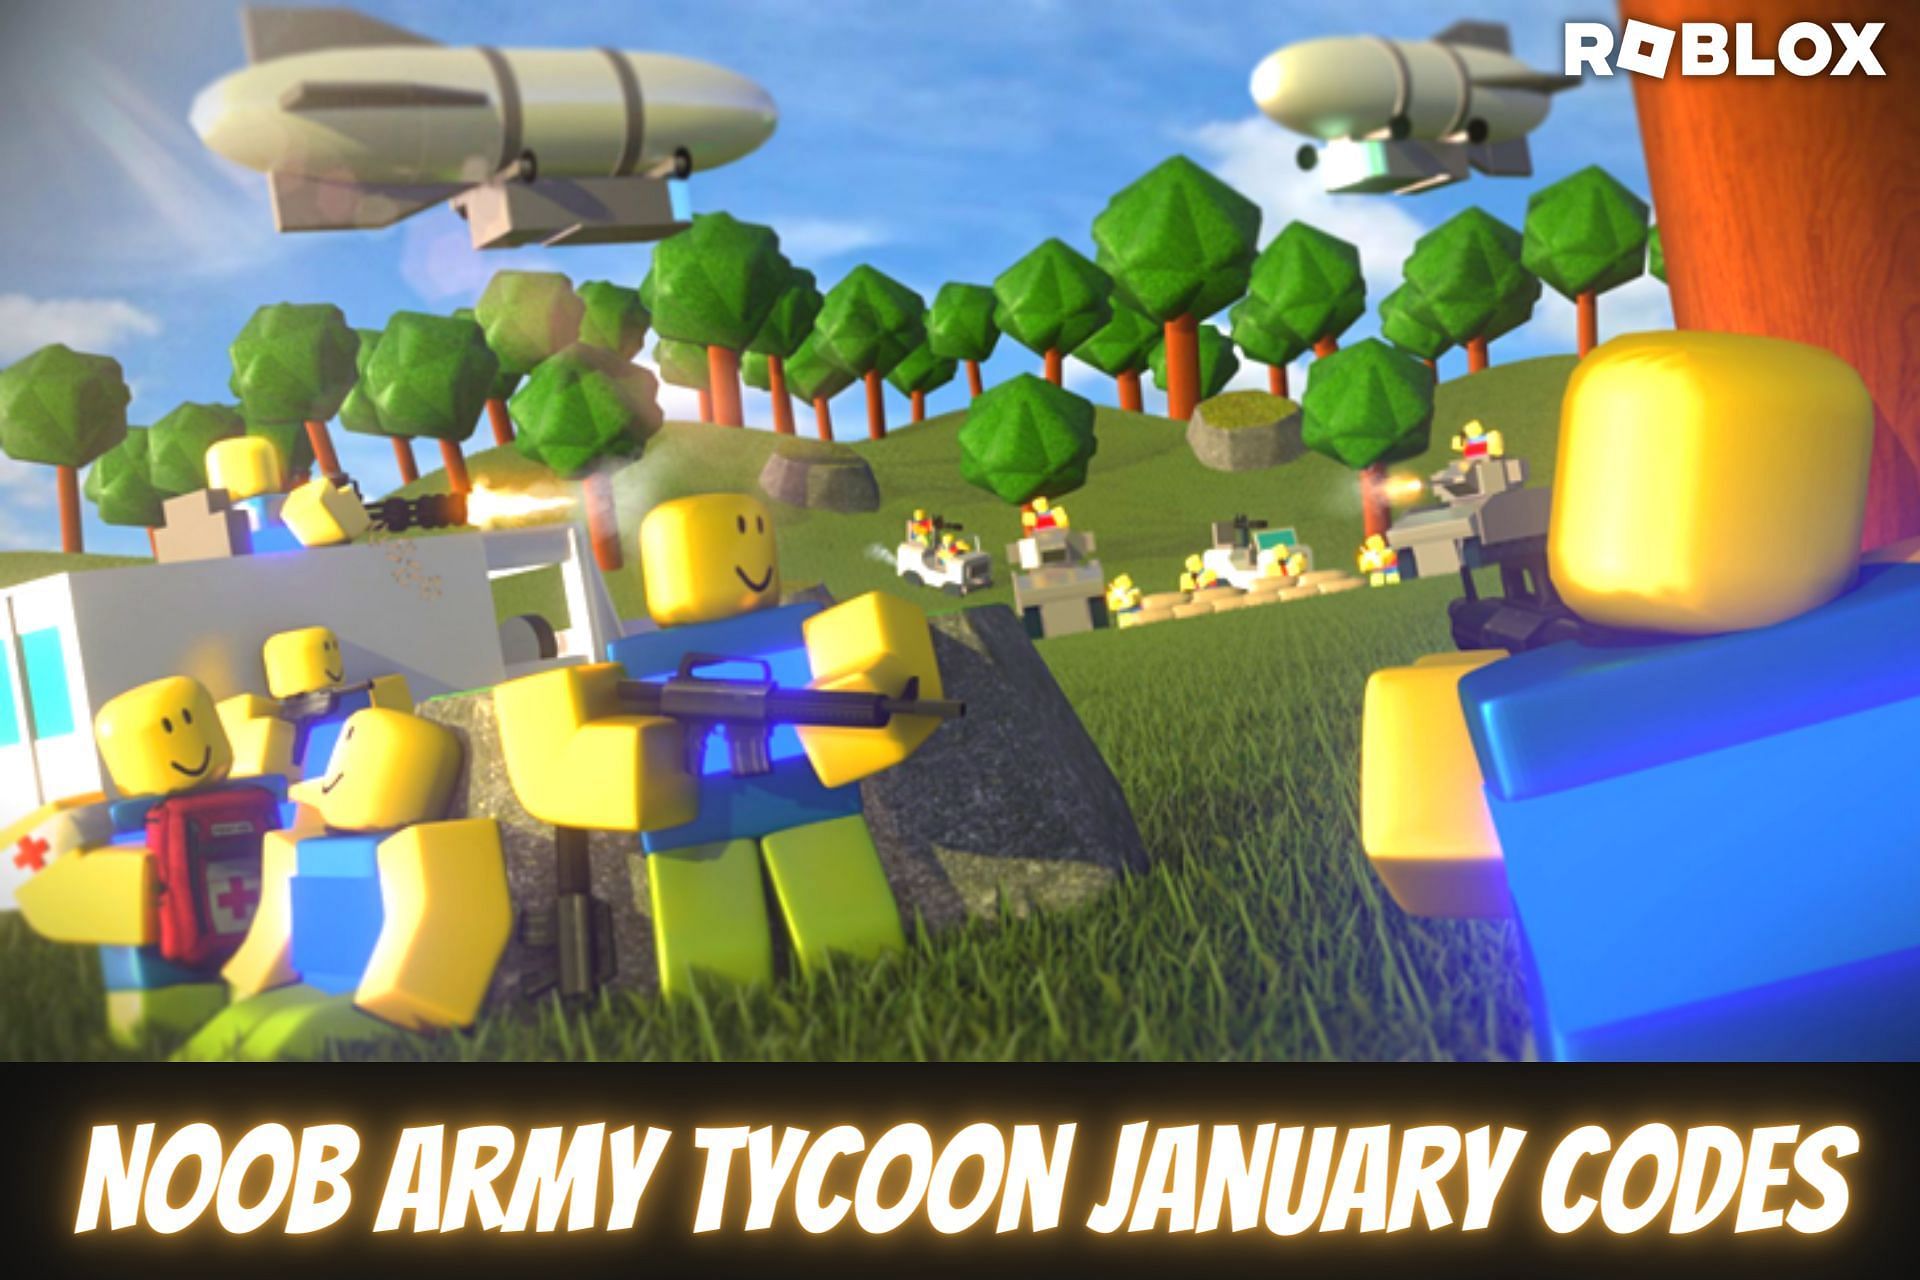 Roblox World of Stands Codes (January 2023)